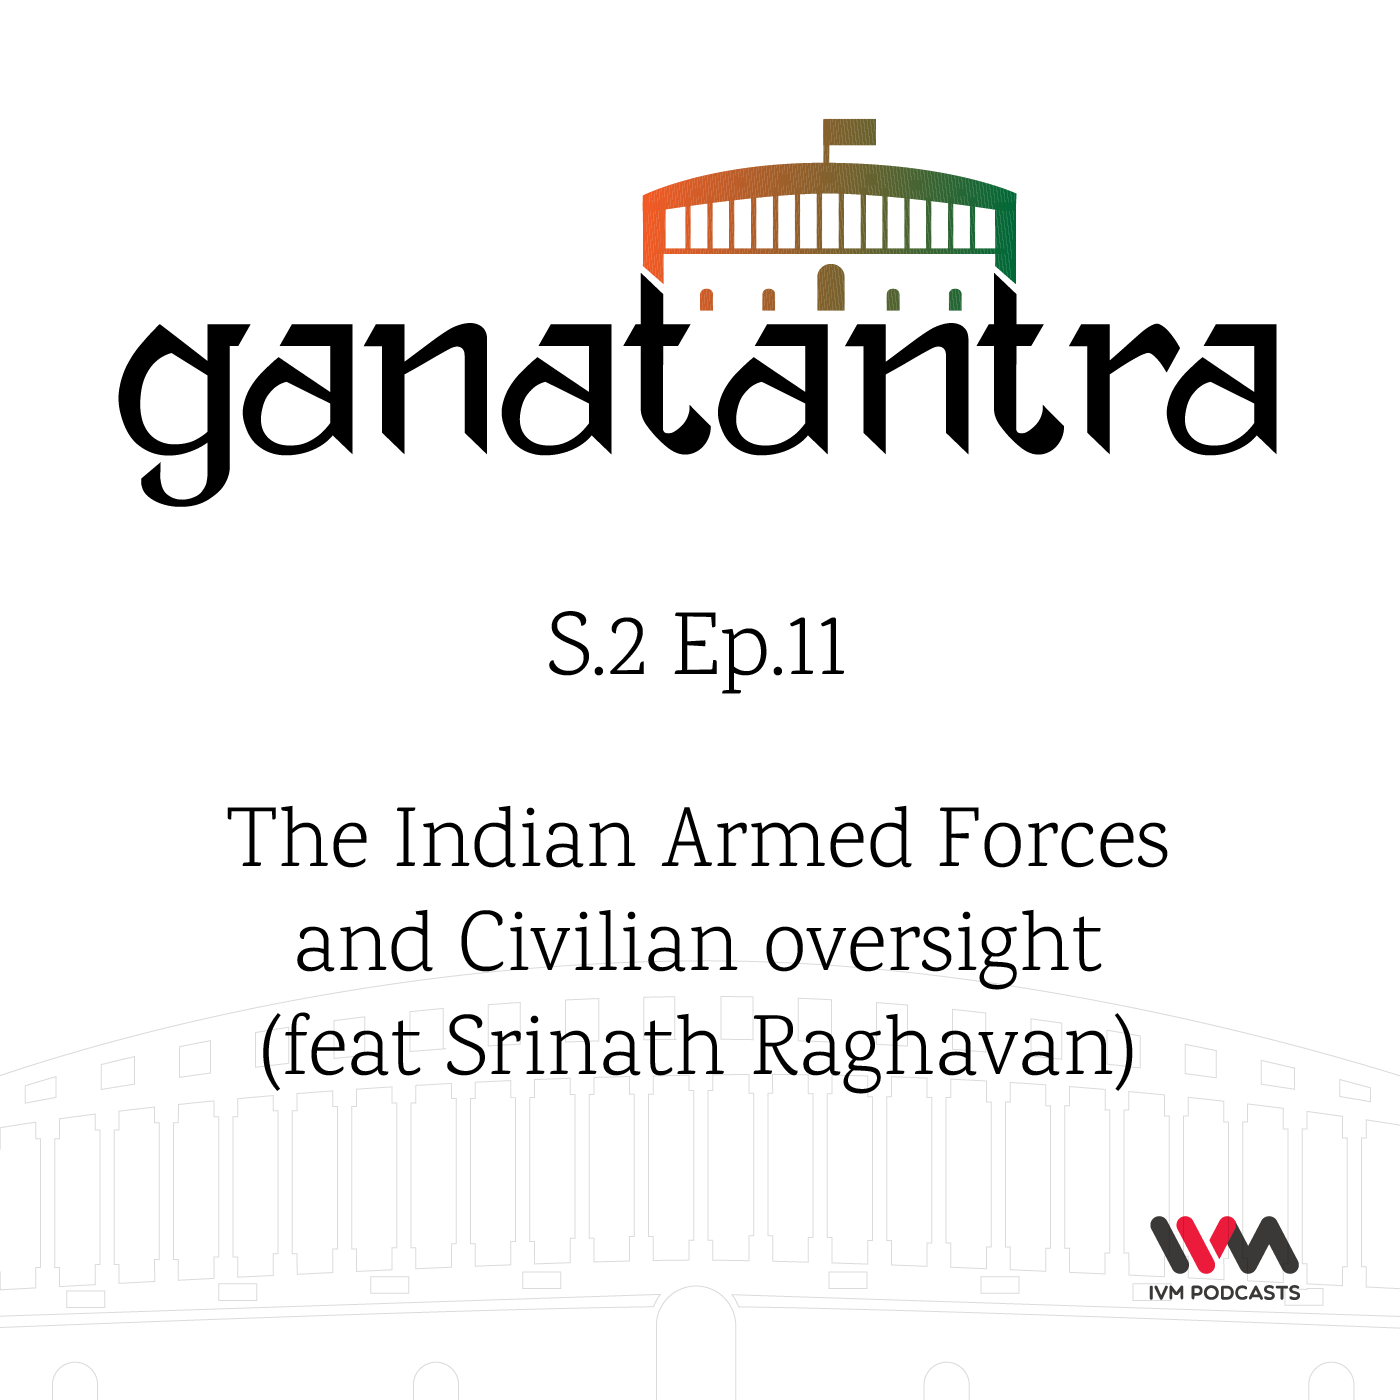 S02 E11: The Indian Armed Forces and Civilian oversight (feat Srinath Raghavan)